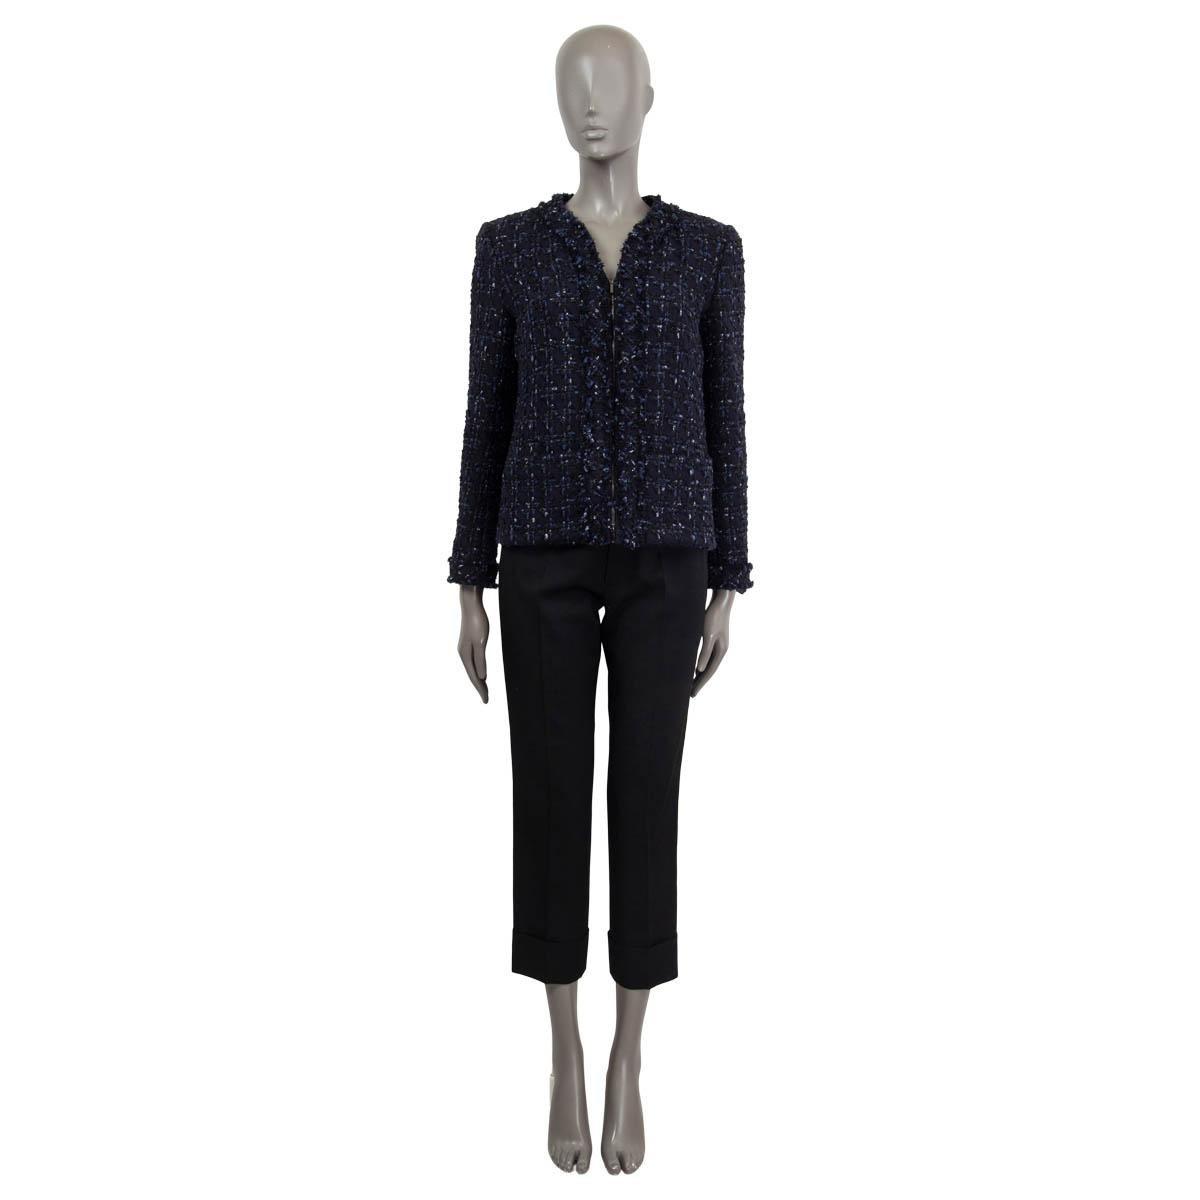 100% authentic Chanel lurex tweed jacket in navy blue, black and silver wool (40%), nylon (36%), viscose (12%), polyester (6%) and polyurethane (6%). Features patch pockets on the front and buttons on the cuffs. Closes with concealed zipper on the